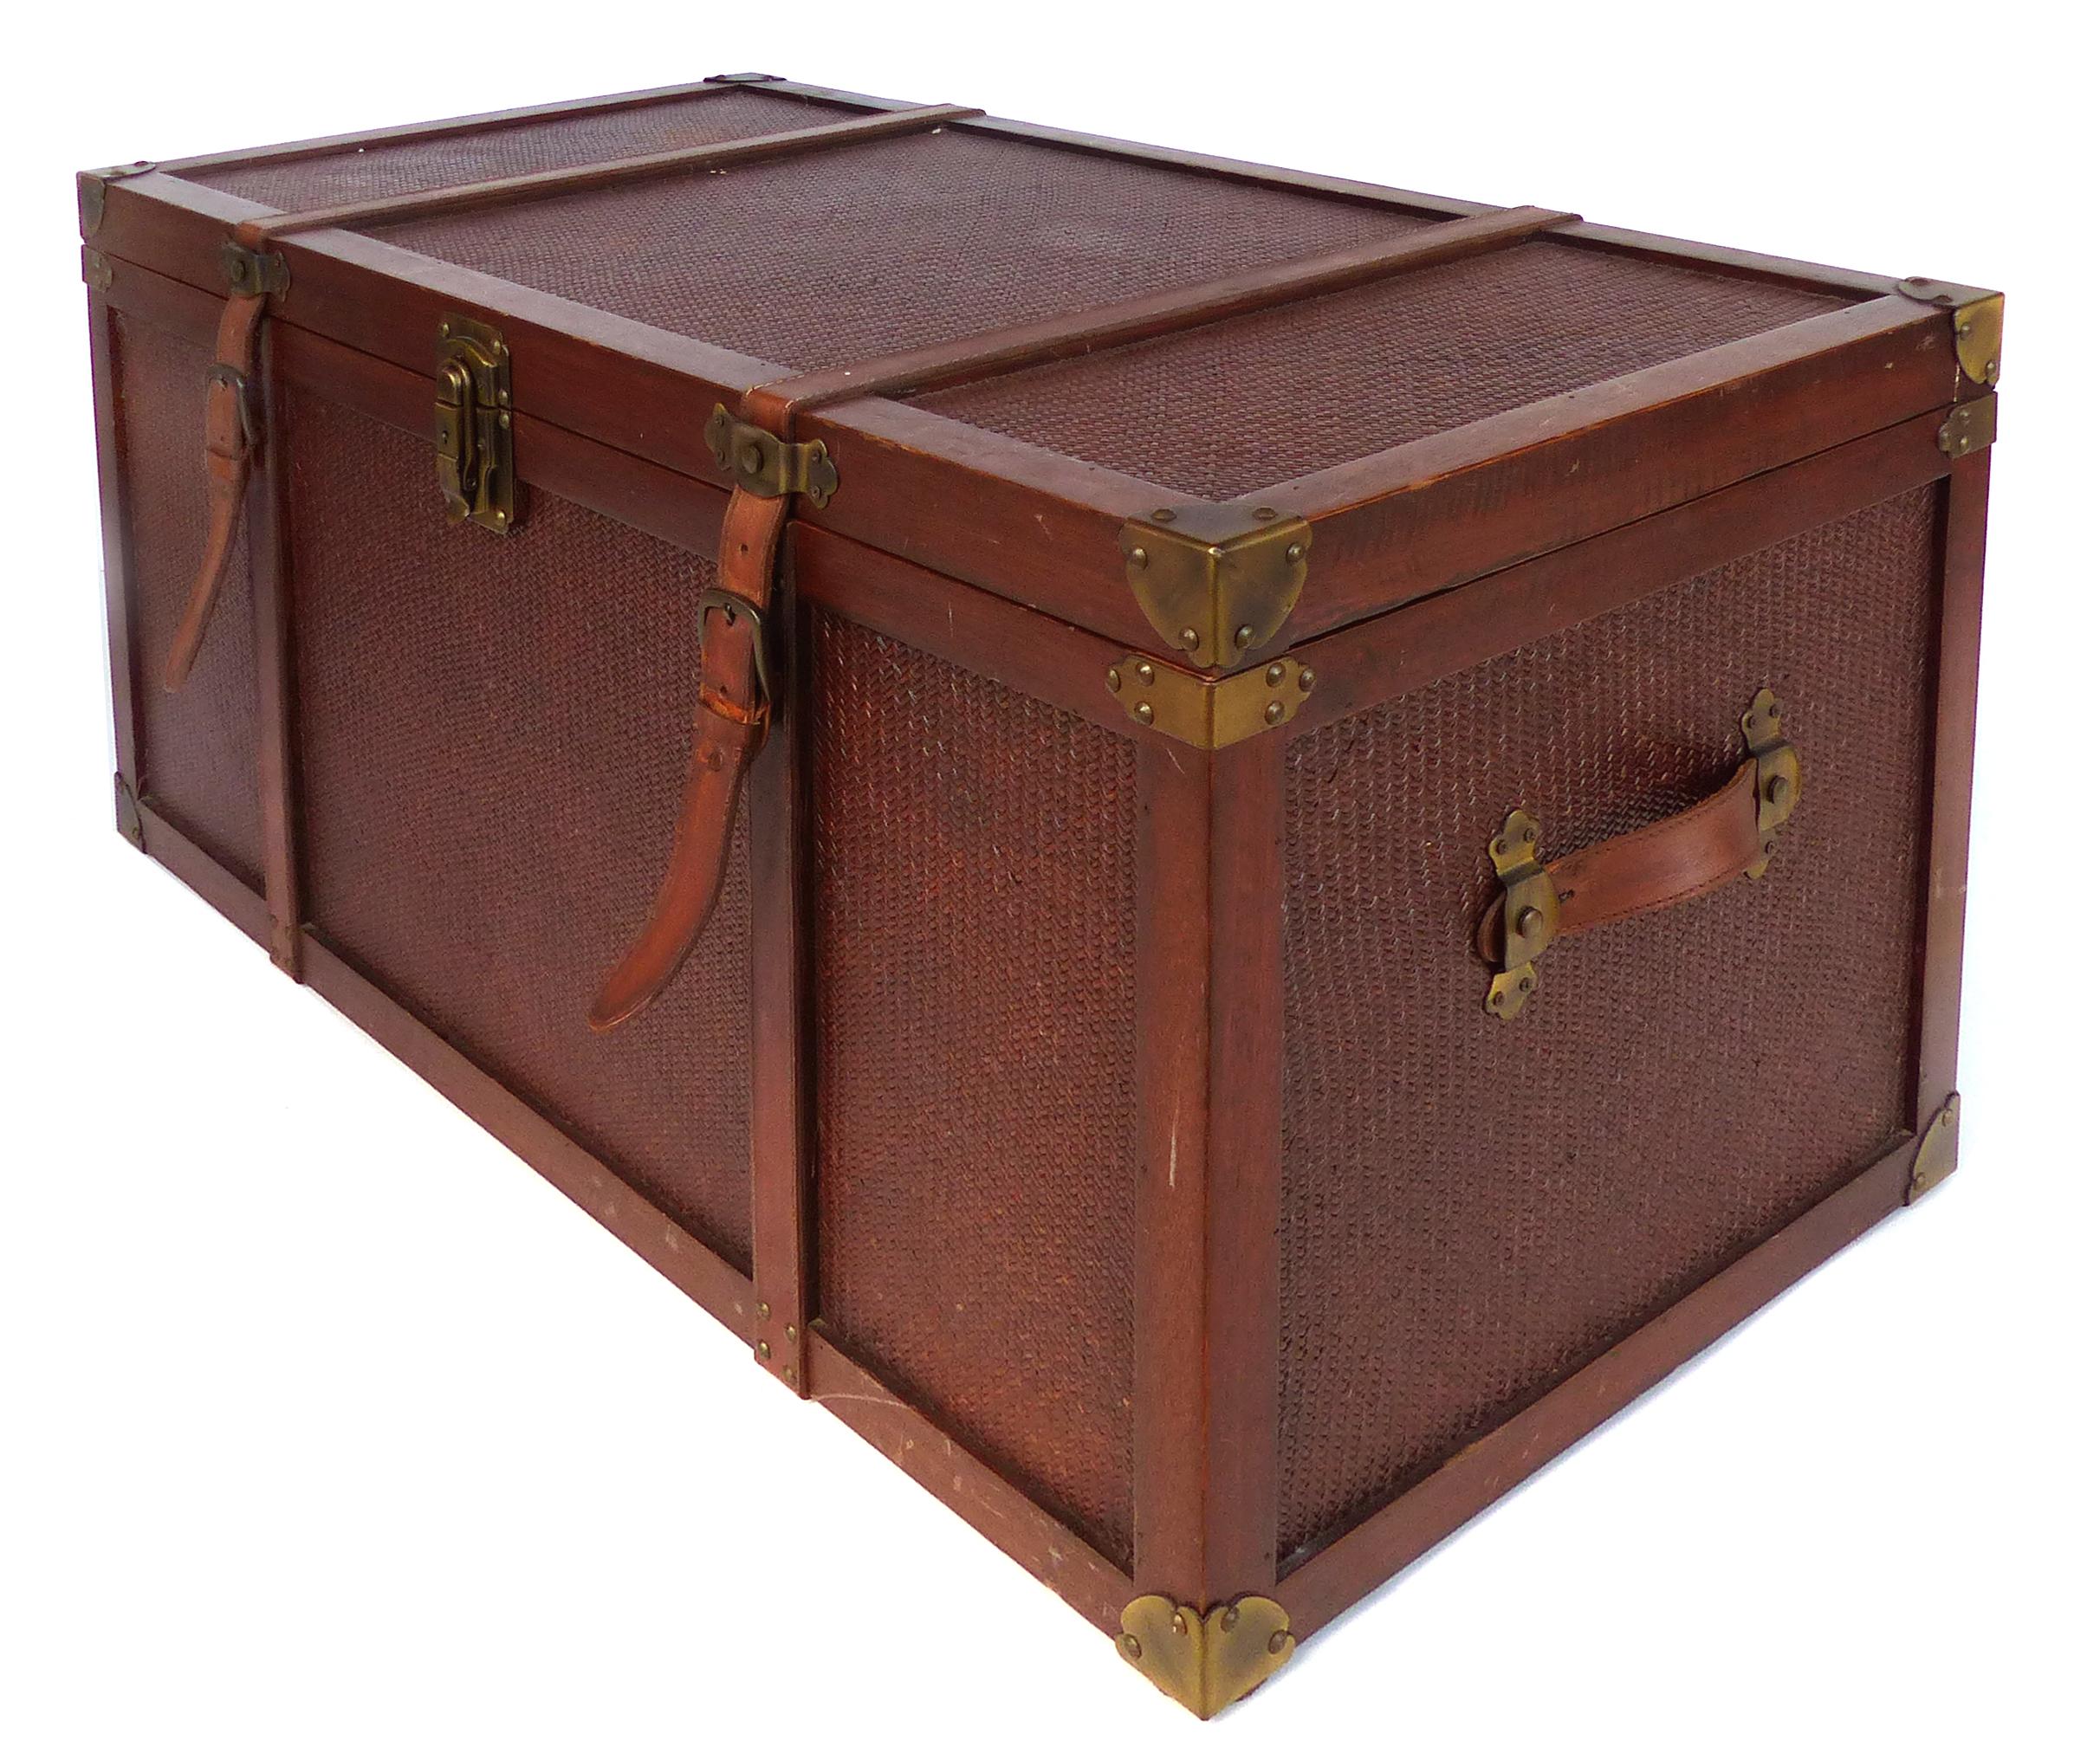 Offered for sale is a decorative blanket chest with woven reed inset panels. The trunk is framed in wood with brass corners and hardware as well a having leather straps handles on either end. The top surface shows vintage wear as depicted.